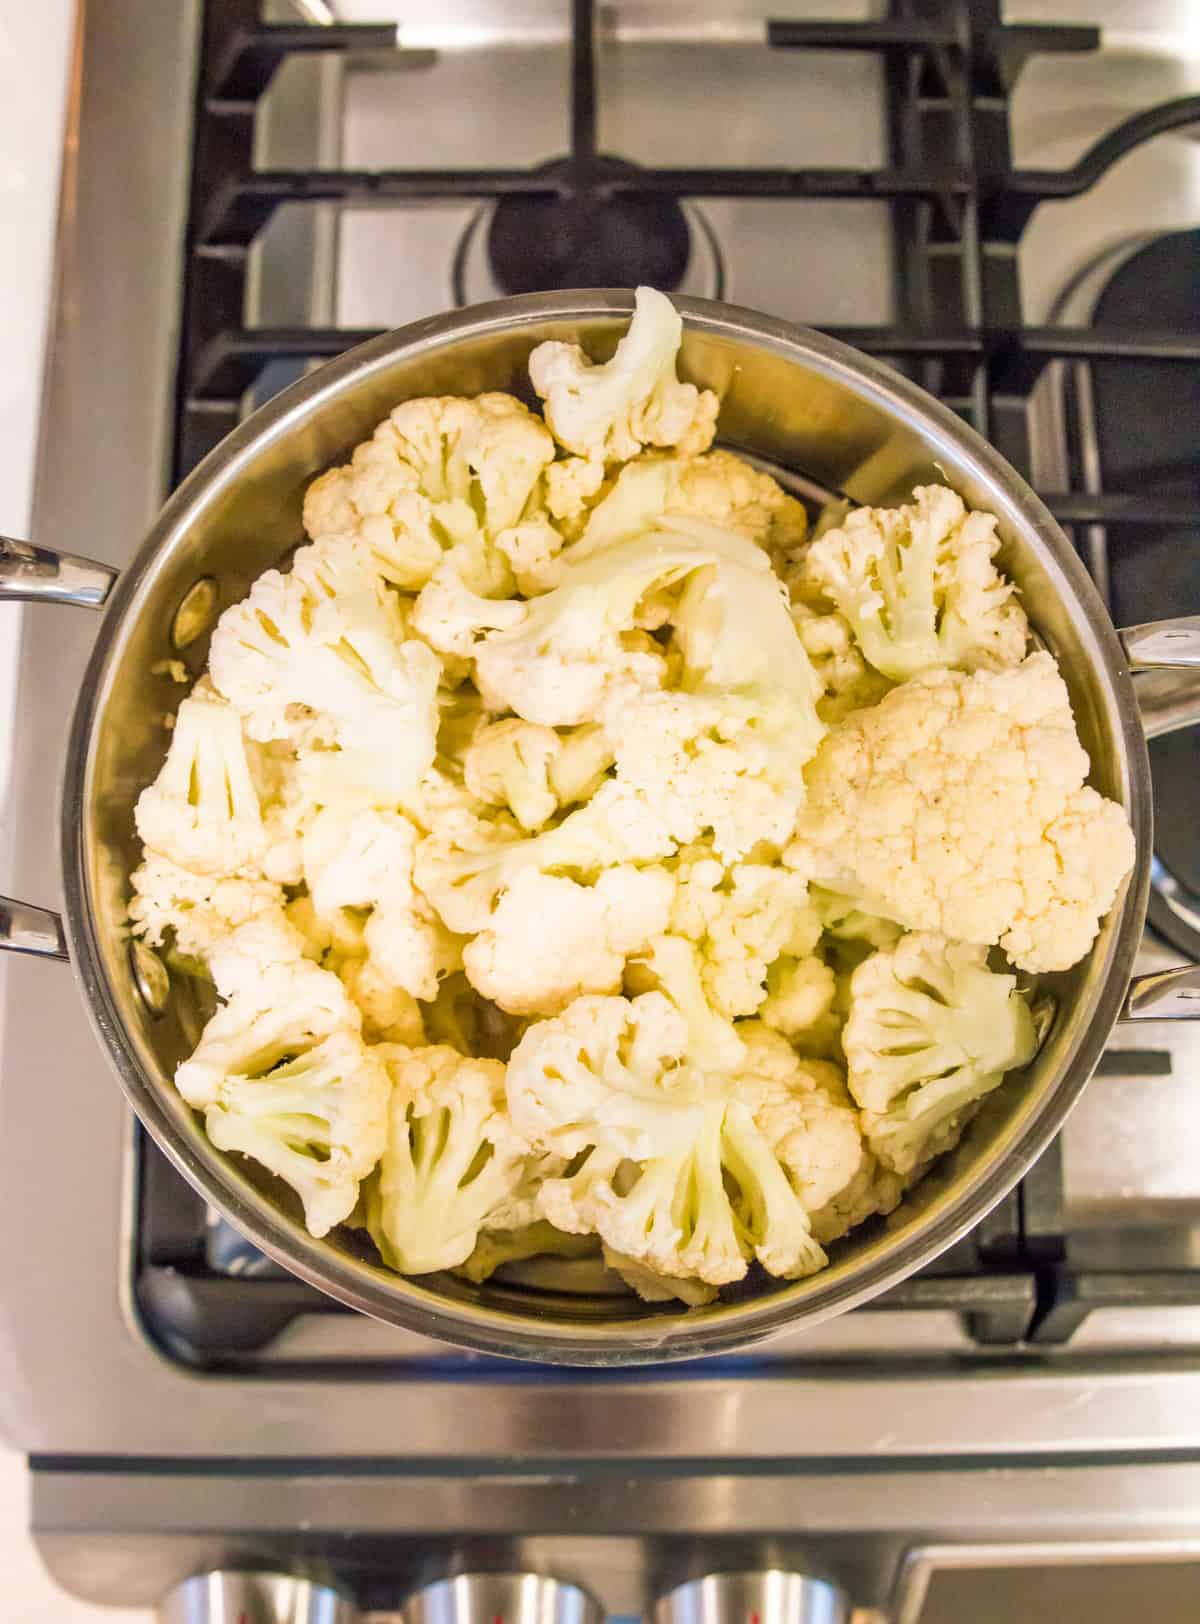 A pot of cauliflower florets on the stovetop.